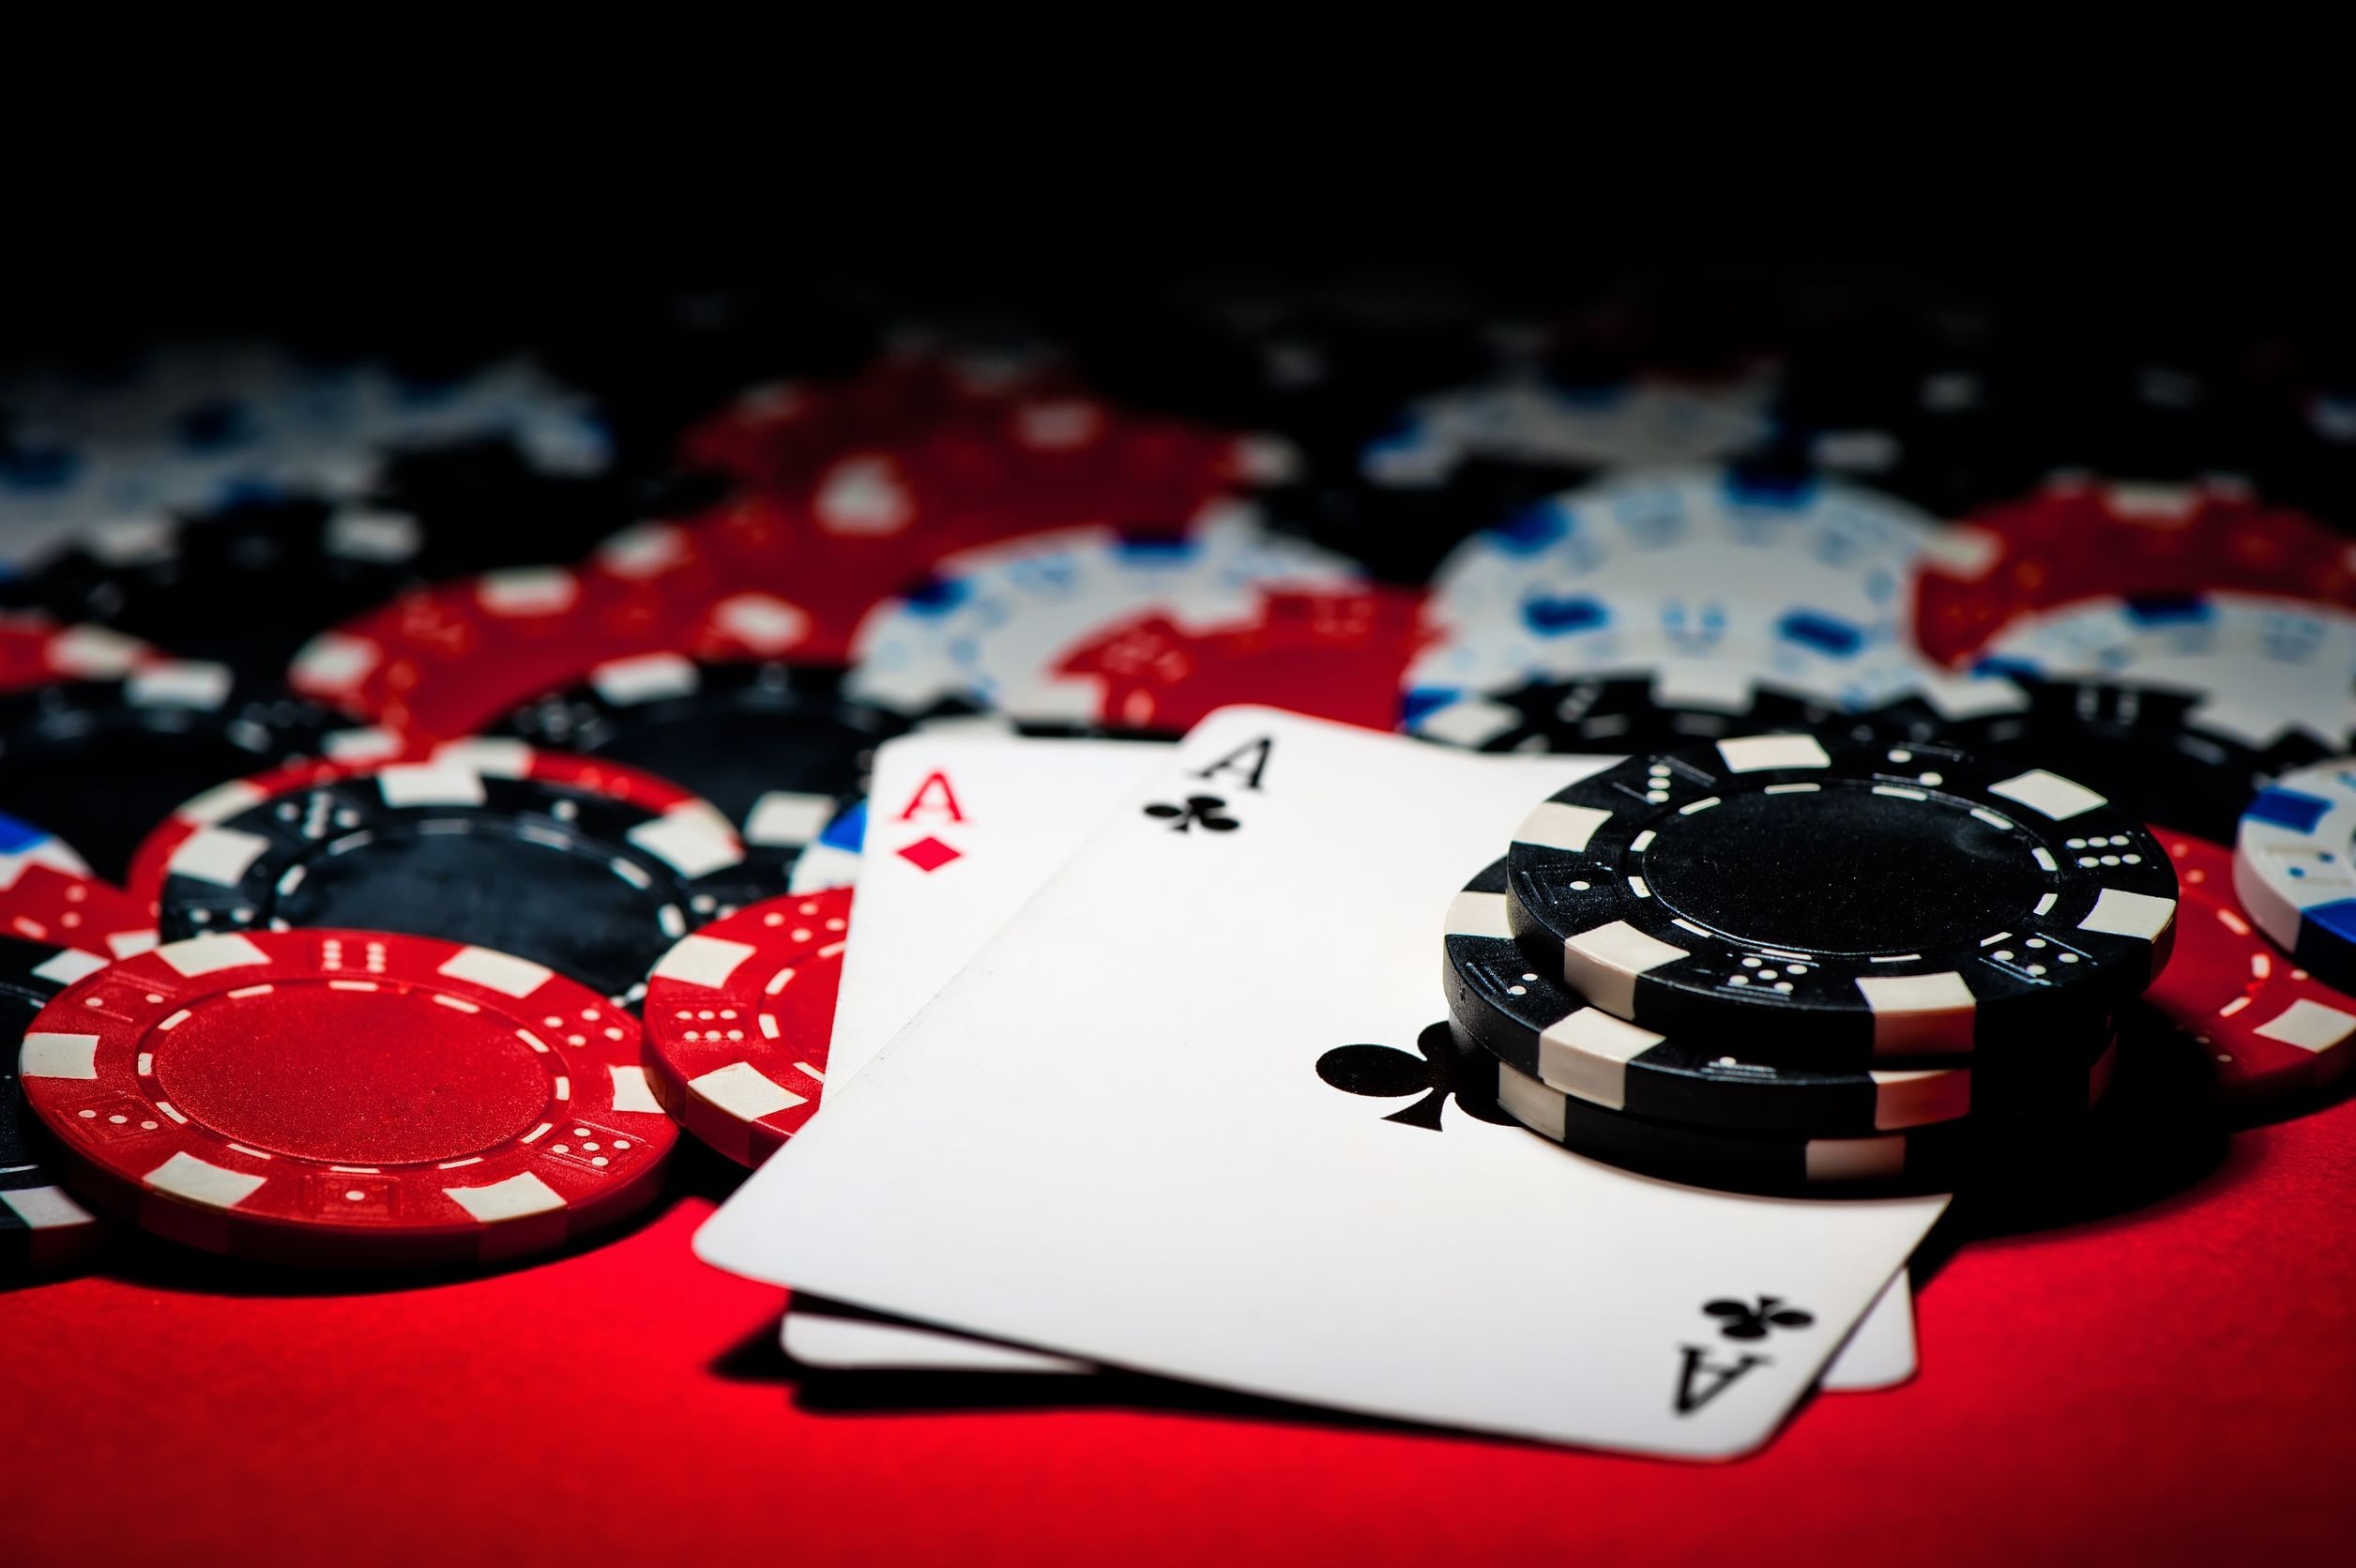 Poker: Discarding two cards, Gambling, The best combinations. 2520x1680 HD Wallpaper.